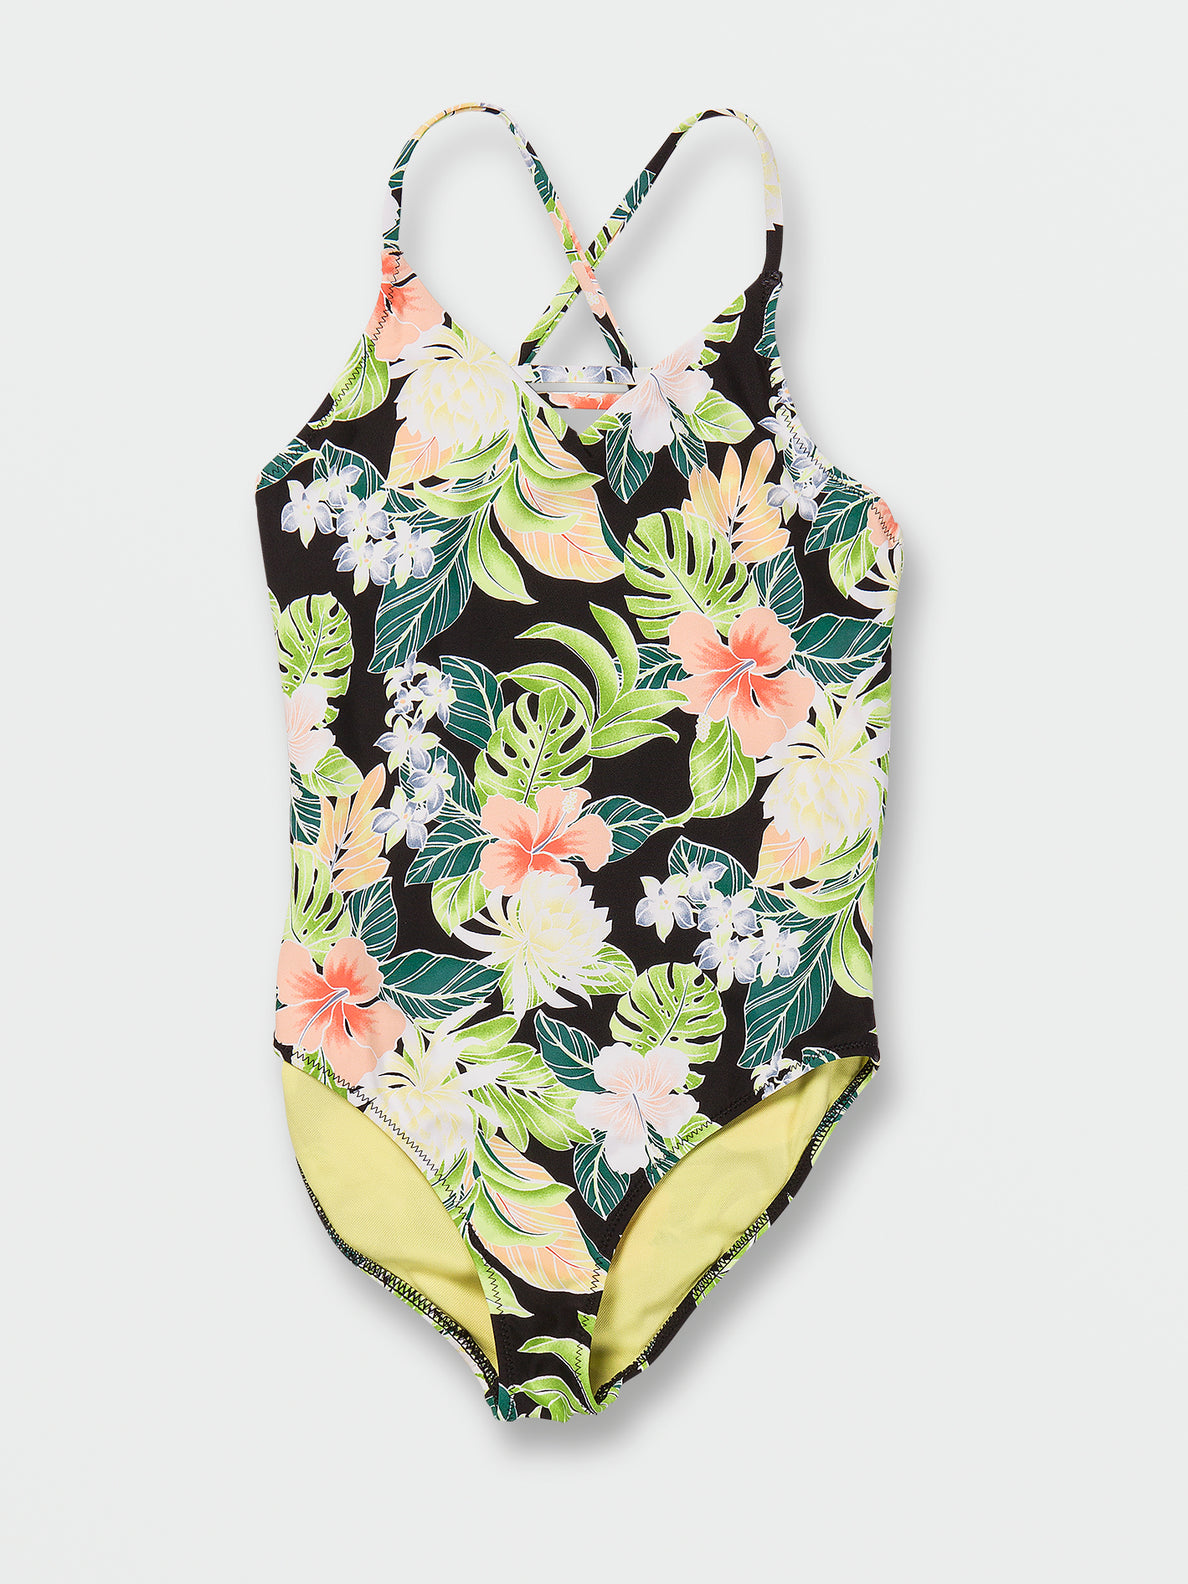 Moana 2 Piece Floral Swimsuit For Kids